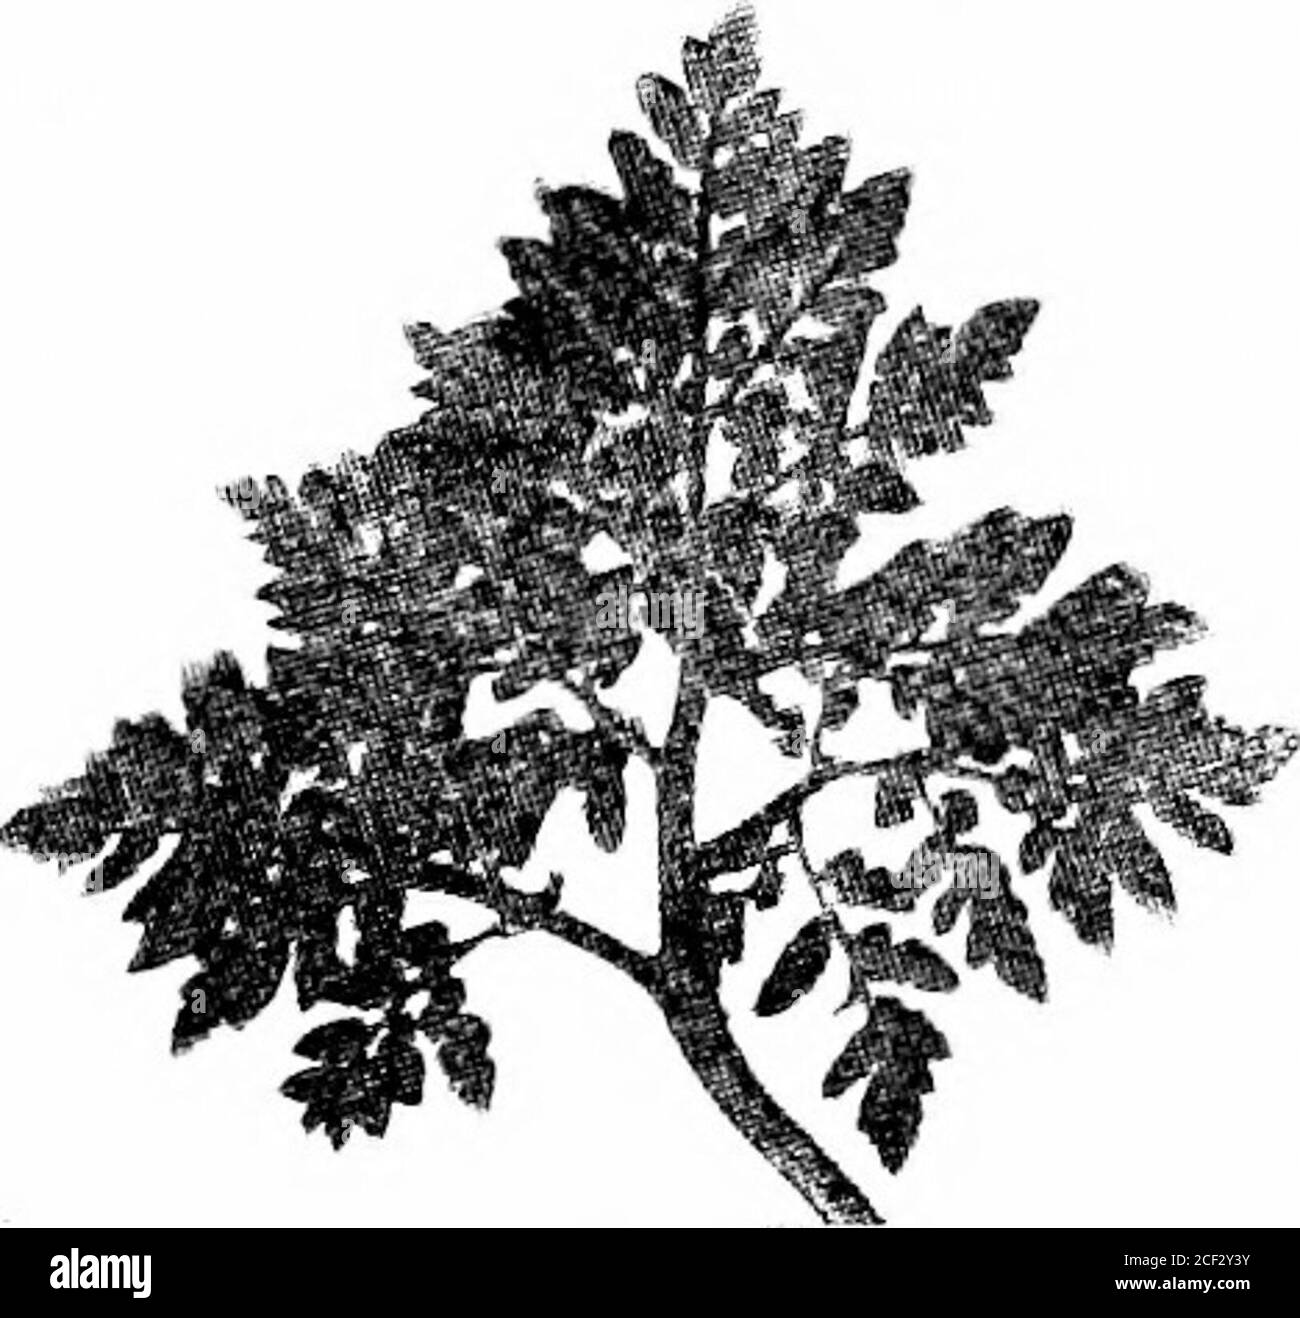 . The fern lover's companion; a guide for the Northeastern States and Canada. Botrychium obliquum, var. dissedum The Fern Lovers Companion 203 (6) Ternate Grape FernBotrychium ternatum, ^a^. intermediiuiiBotri/Cliium obFiquum, var. intermedium Leaf more diided than in obliqinim and the numeroussegments not so long and pointed, but large, fleshy, ovateor obovate (including xnr. austride), crenulate, and moreor less toothed. Sandy soil, pastures and open woods. More northerlyin its range — New England and New York. Var.Tutaefblium. More slender, rarely over six or se^-en incheshigh; sterile seg Stock Photo